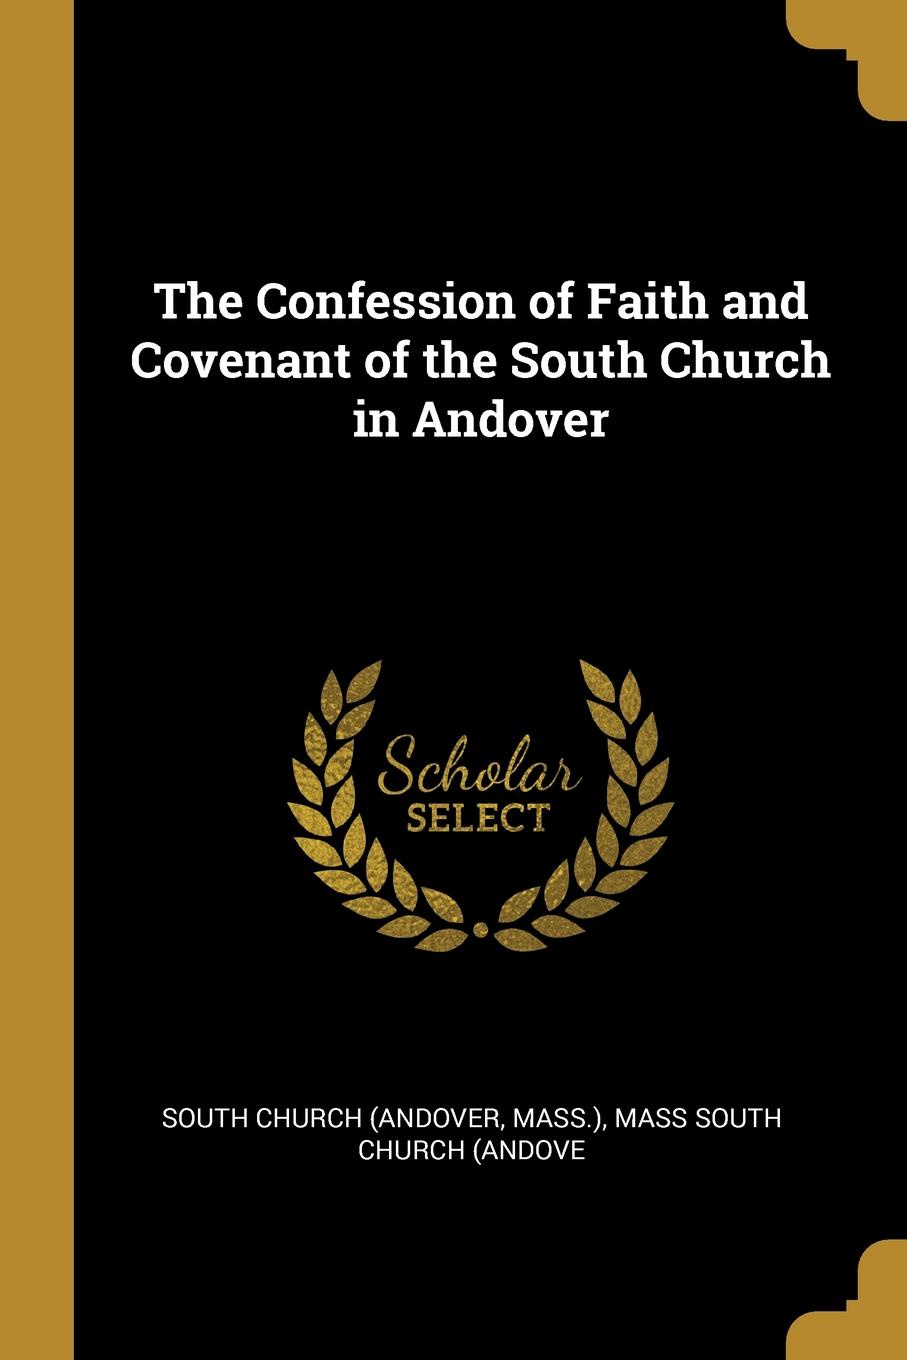 The Confession of Faith and Covenant of the South Church in Andover